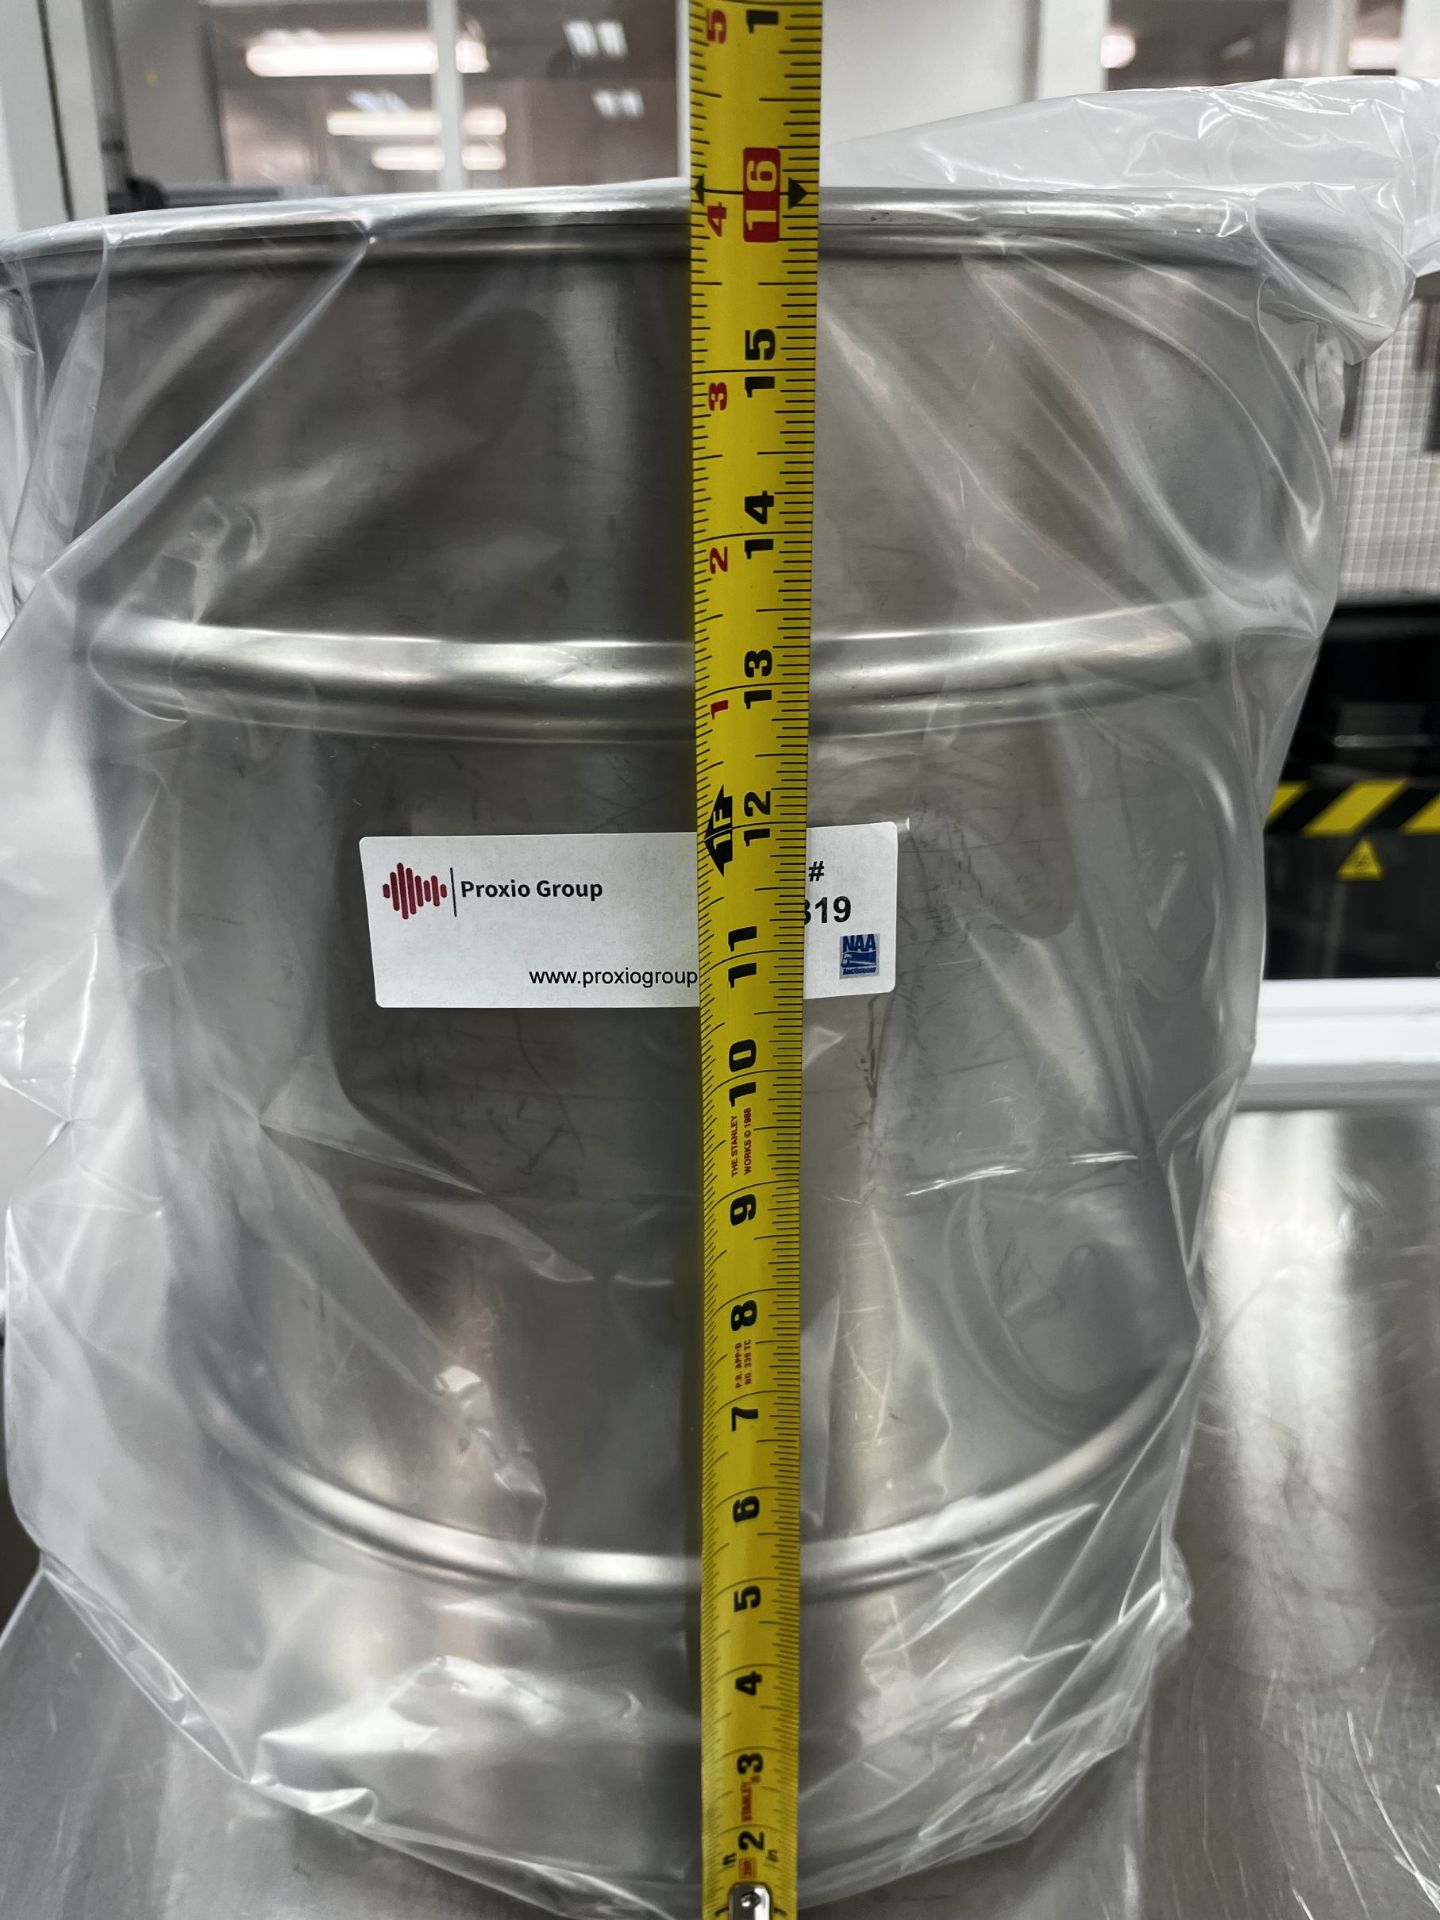 60 Liter Stainless Steel Pot with Lid - Image 3 of 4